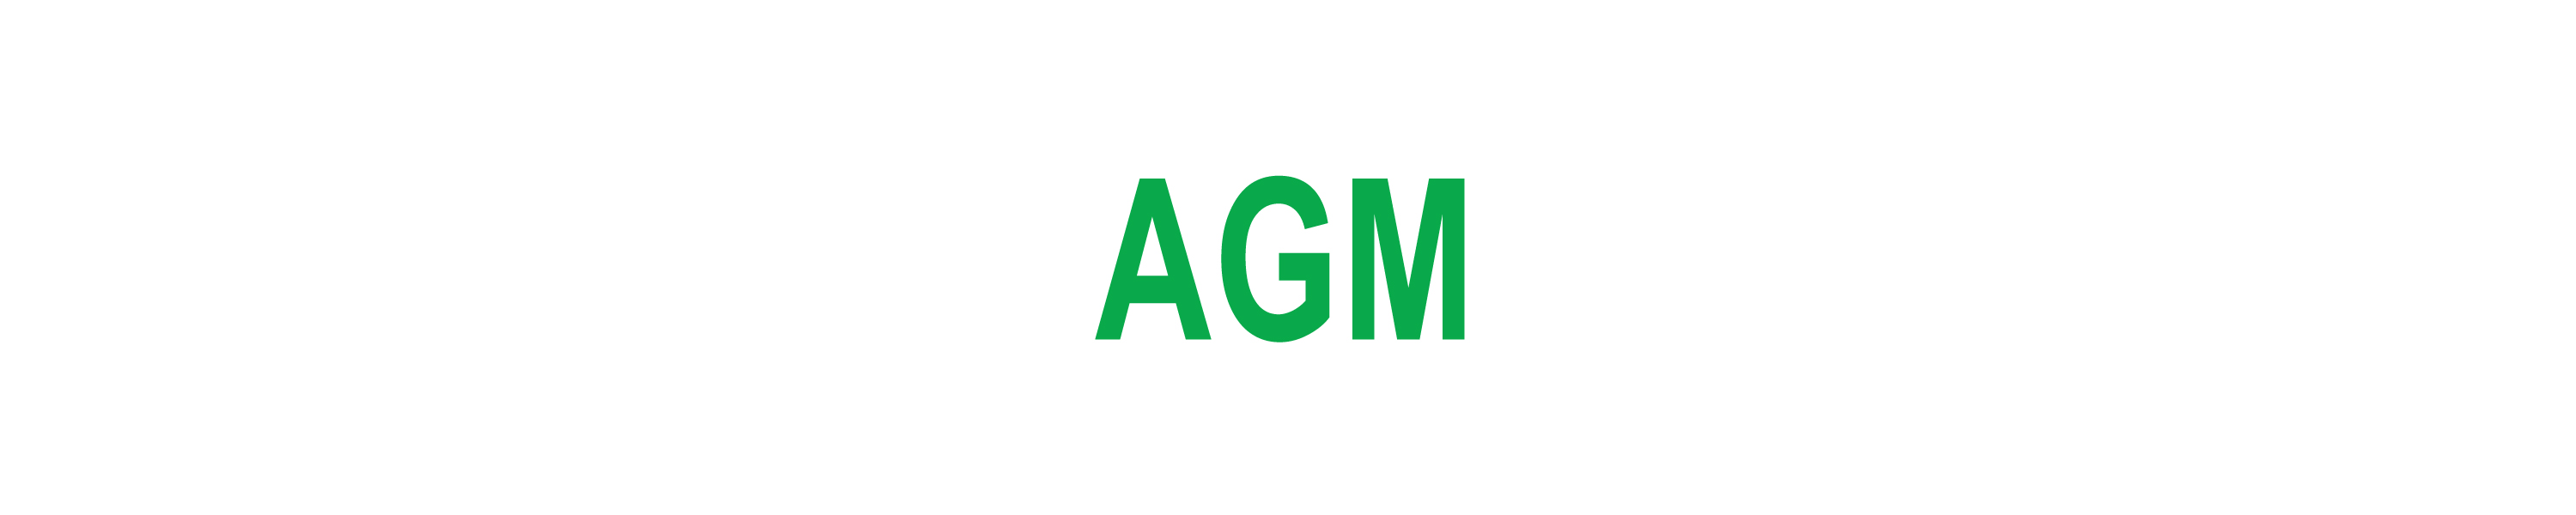 Pre-register for AGM by Oct. 11 to be eligible for a prize